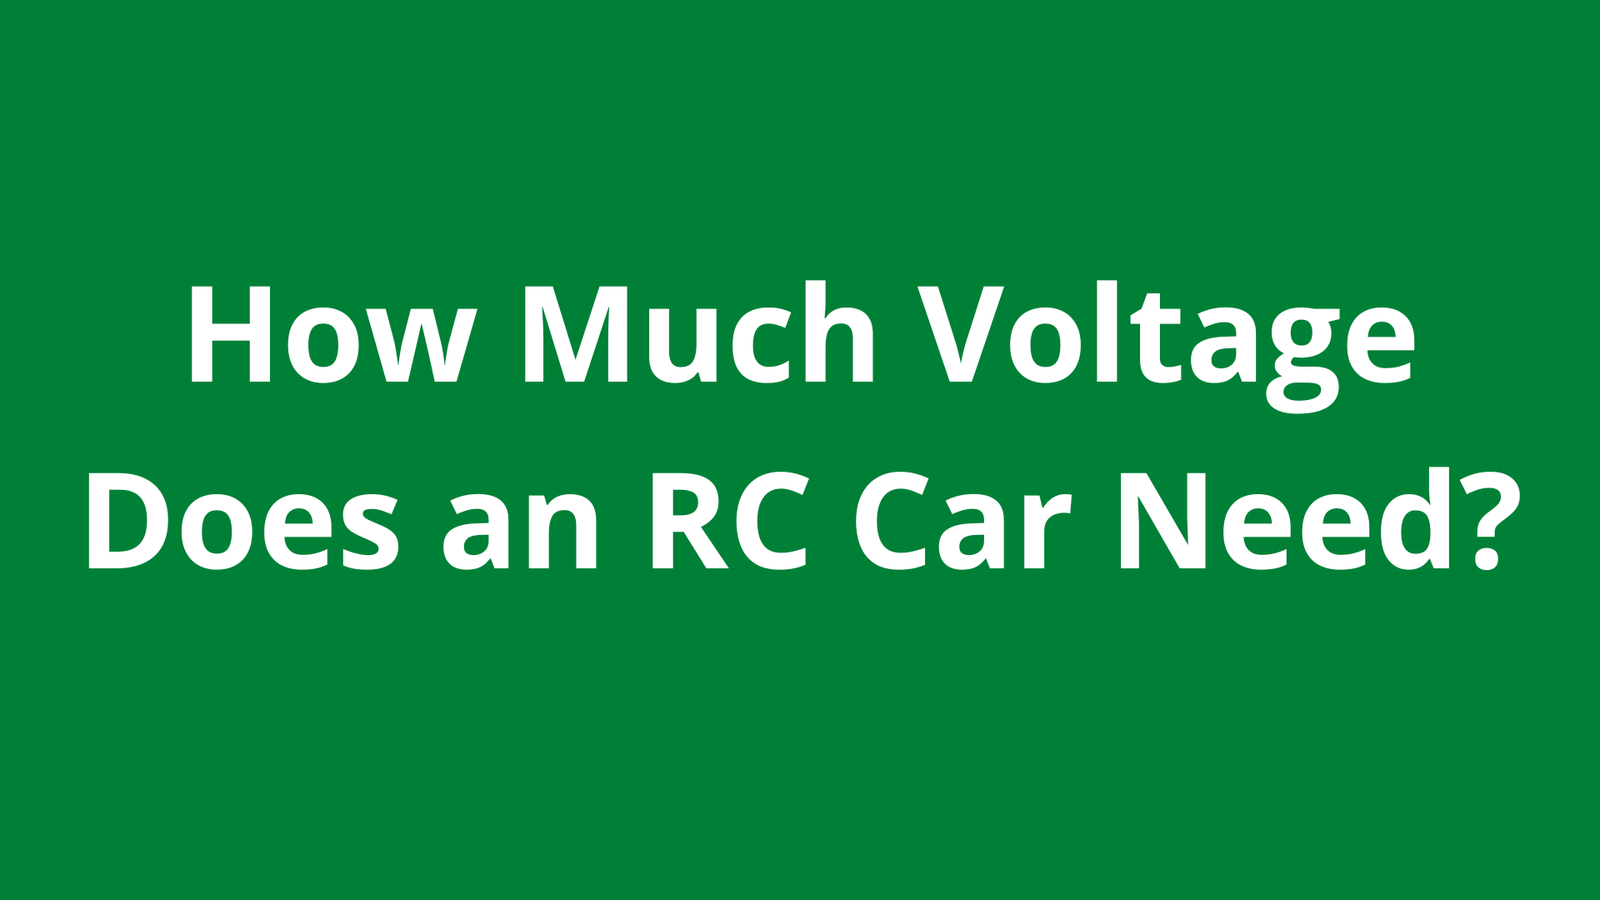 How Much Voltage Does an RC Car Need?